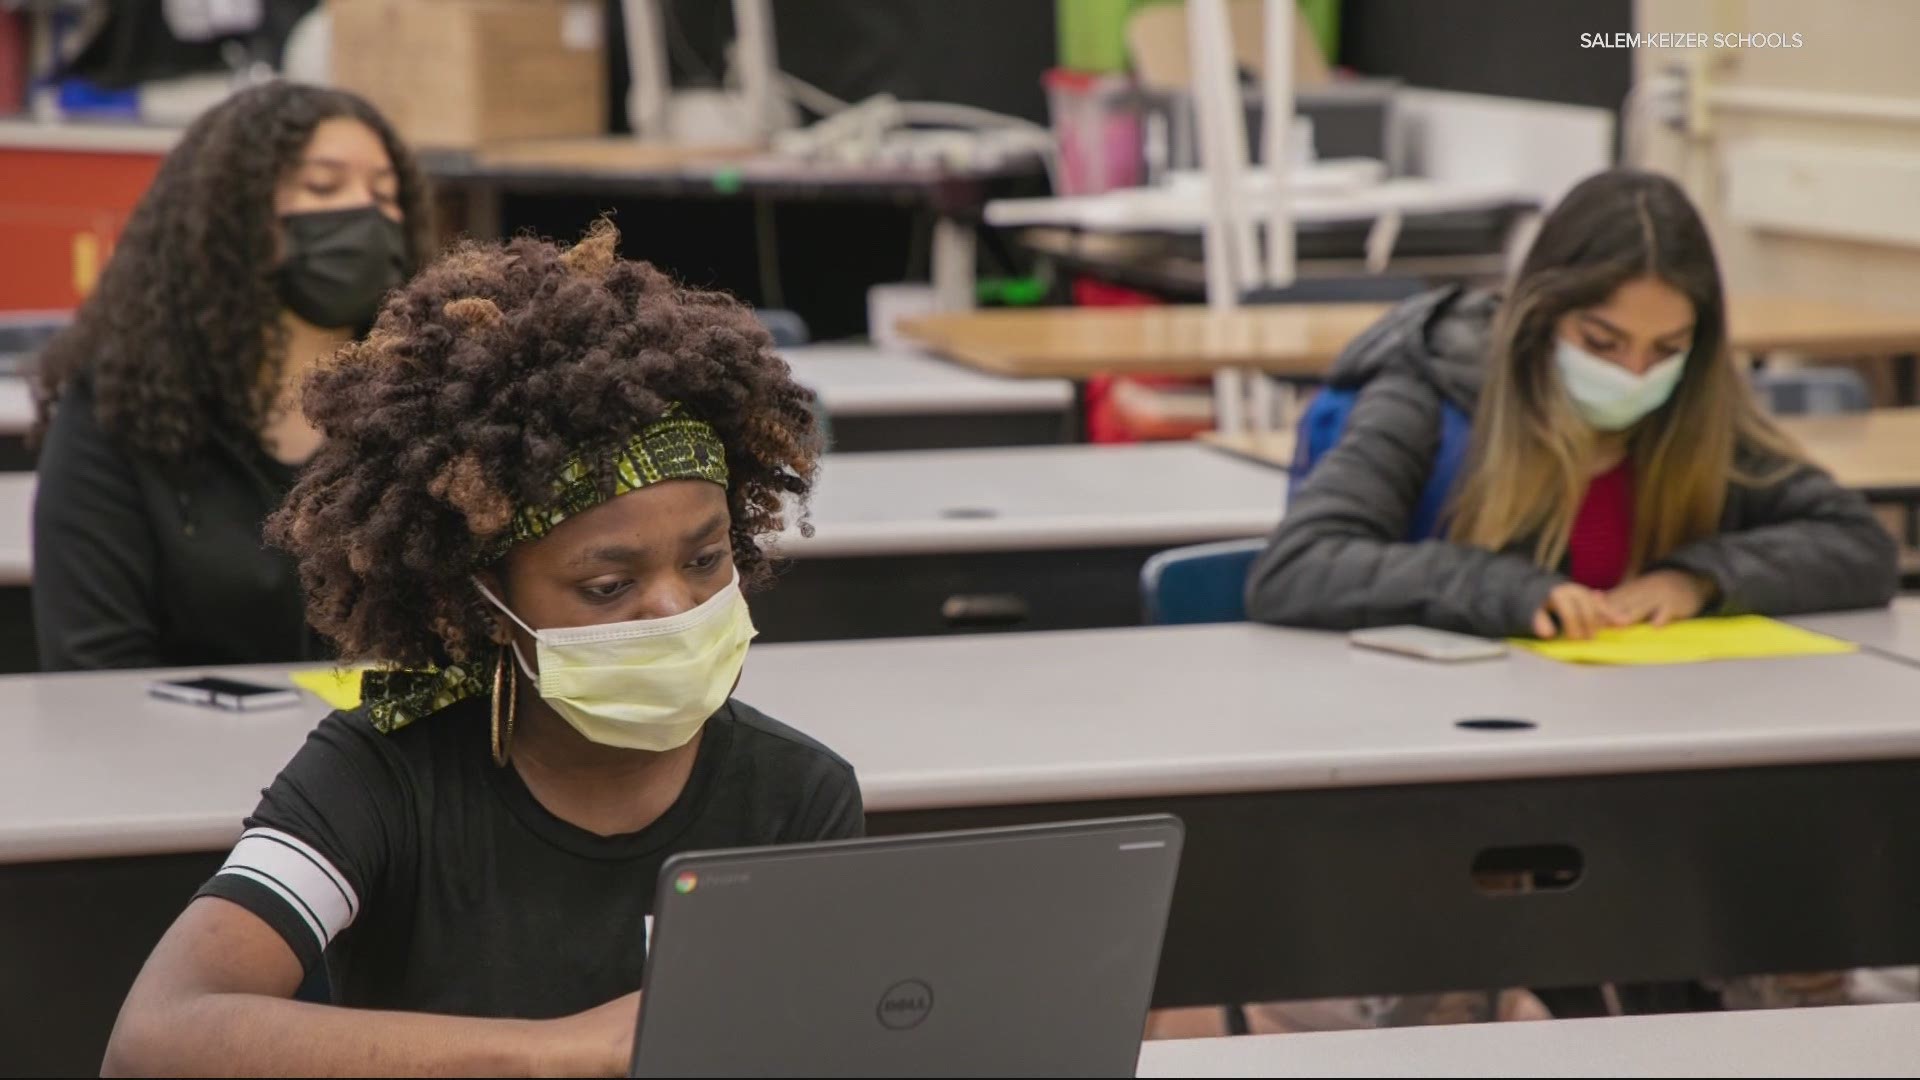 The psychological impact of the pandemic is evident to those working in schools. Christine Pitawanich reports on the effort to provide students extra support.